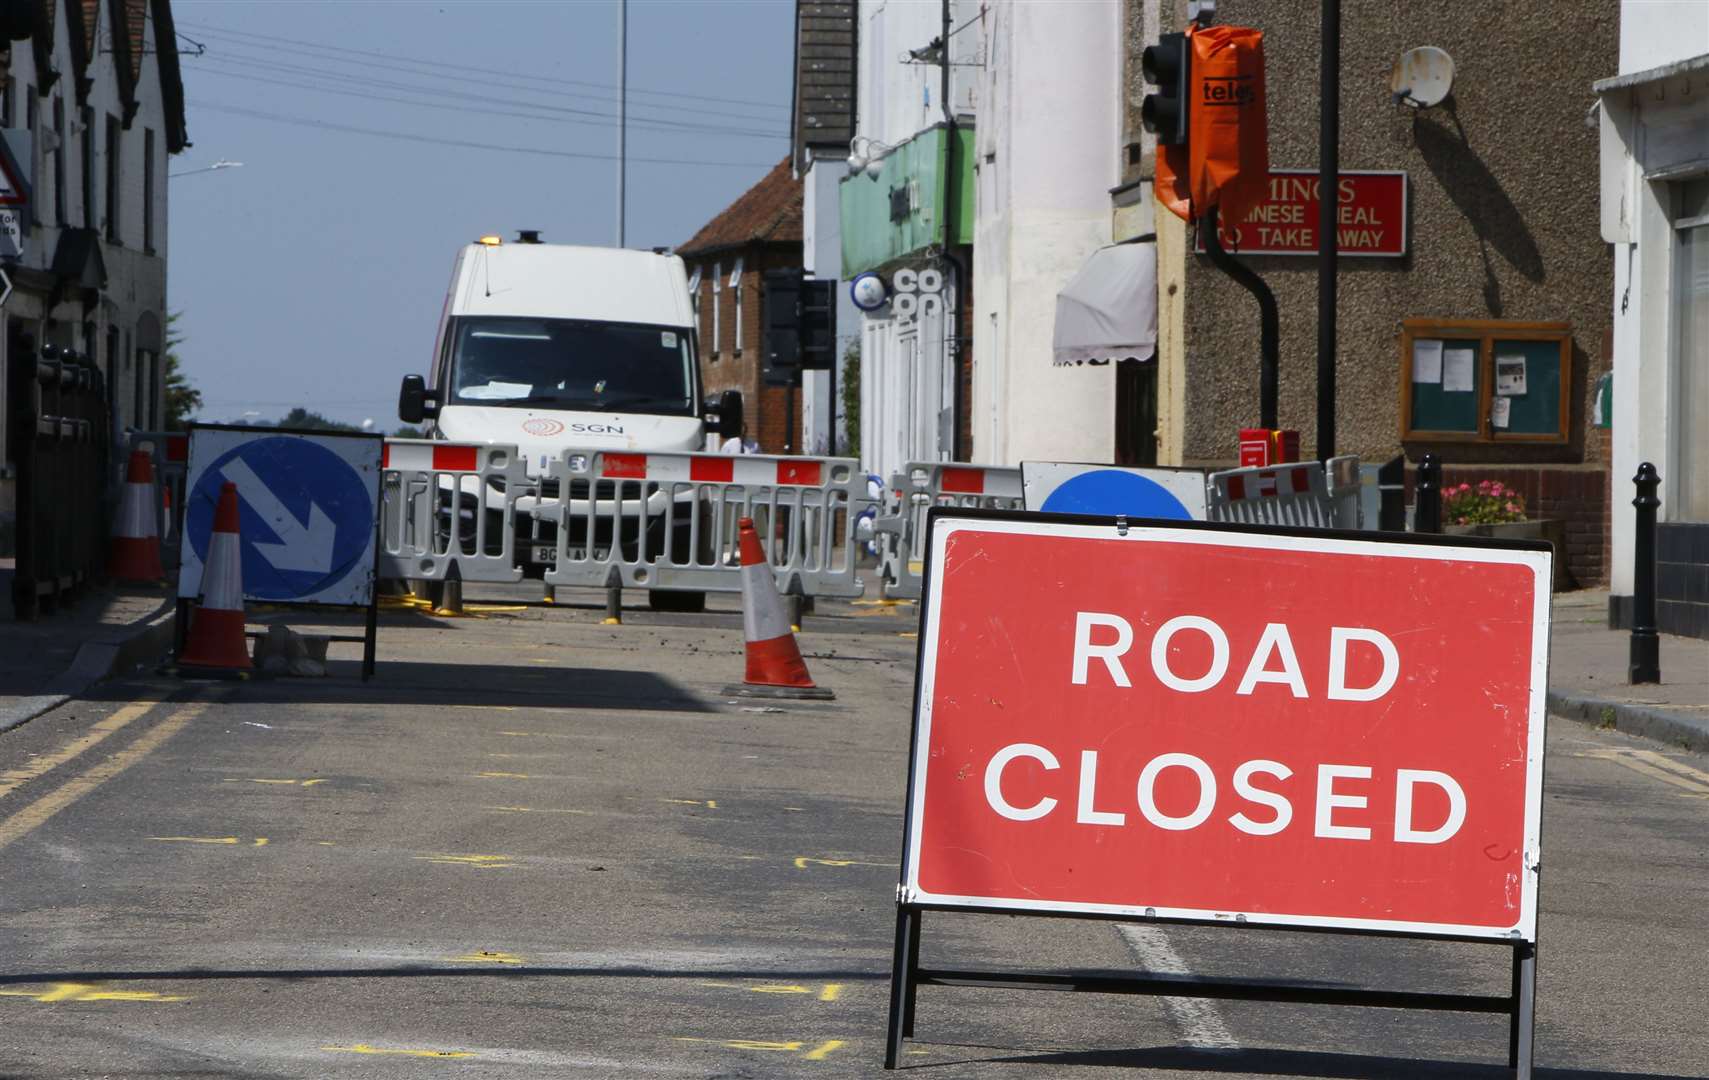 The A2 will be shut for up to a month at Newington High Street, near Sittingbourne